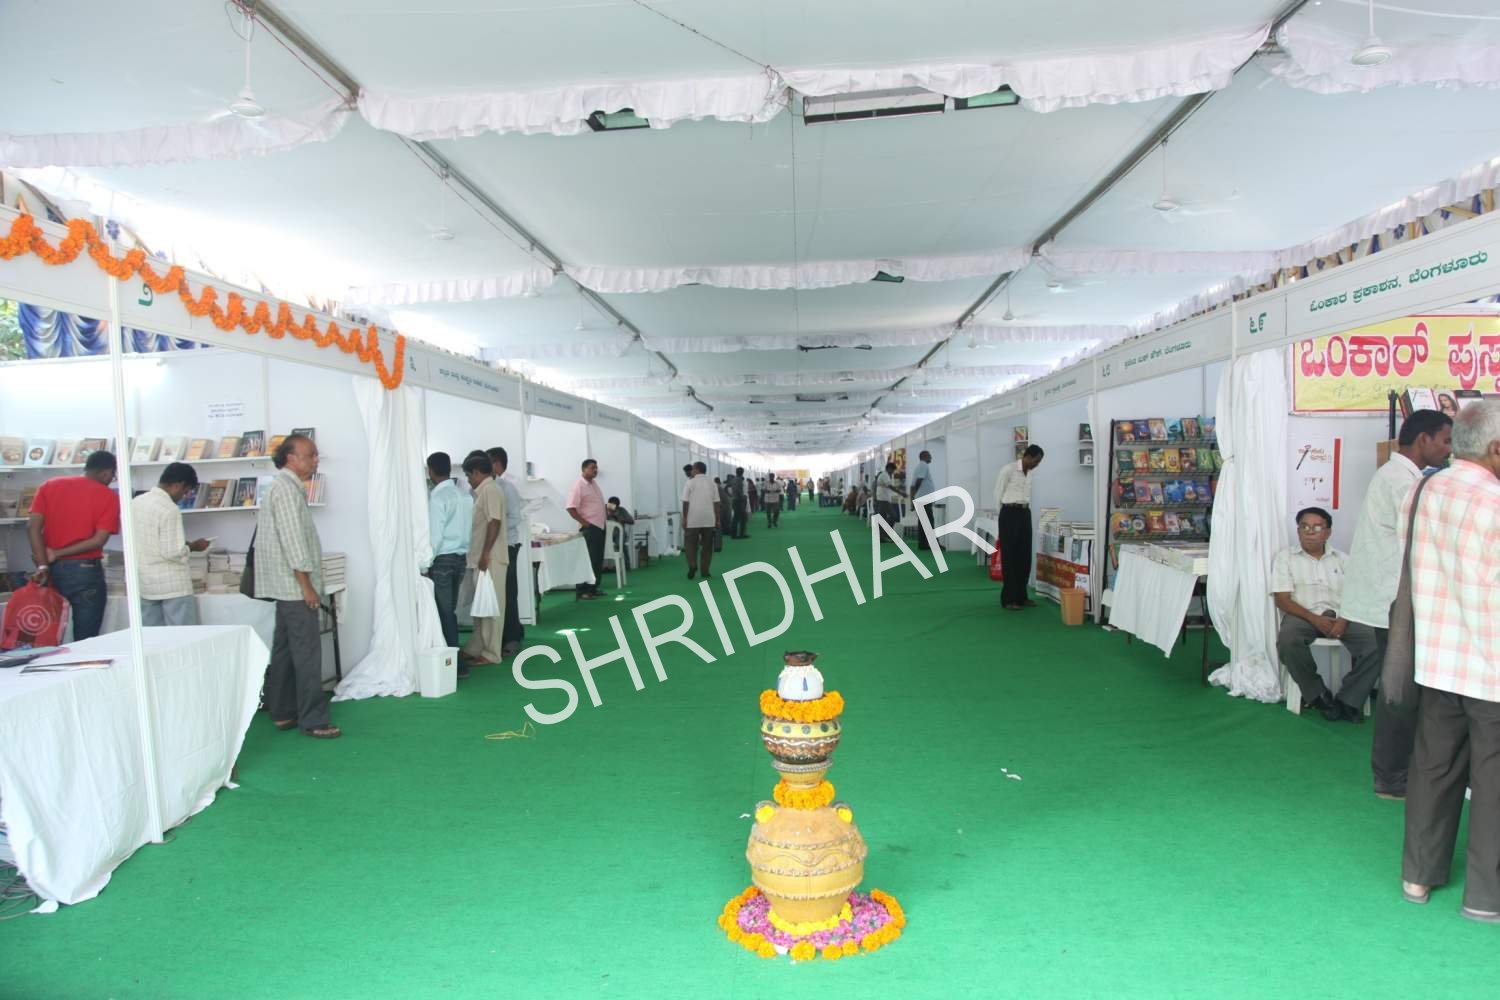 exhibition stalls for rent for hire in bangalore contact shridhar tent house bangalore karnataka